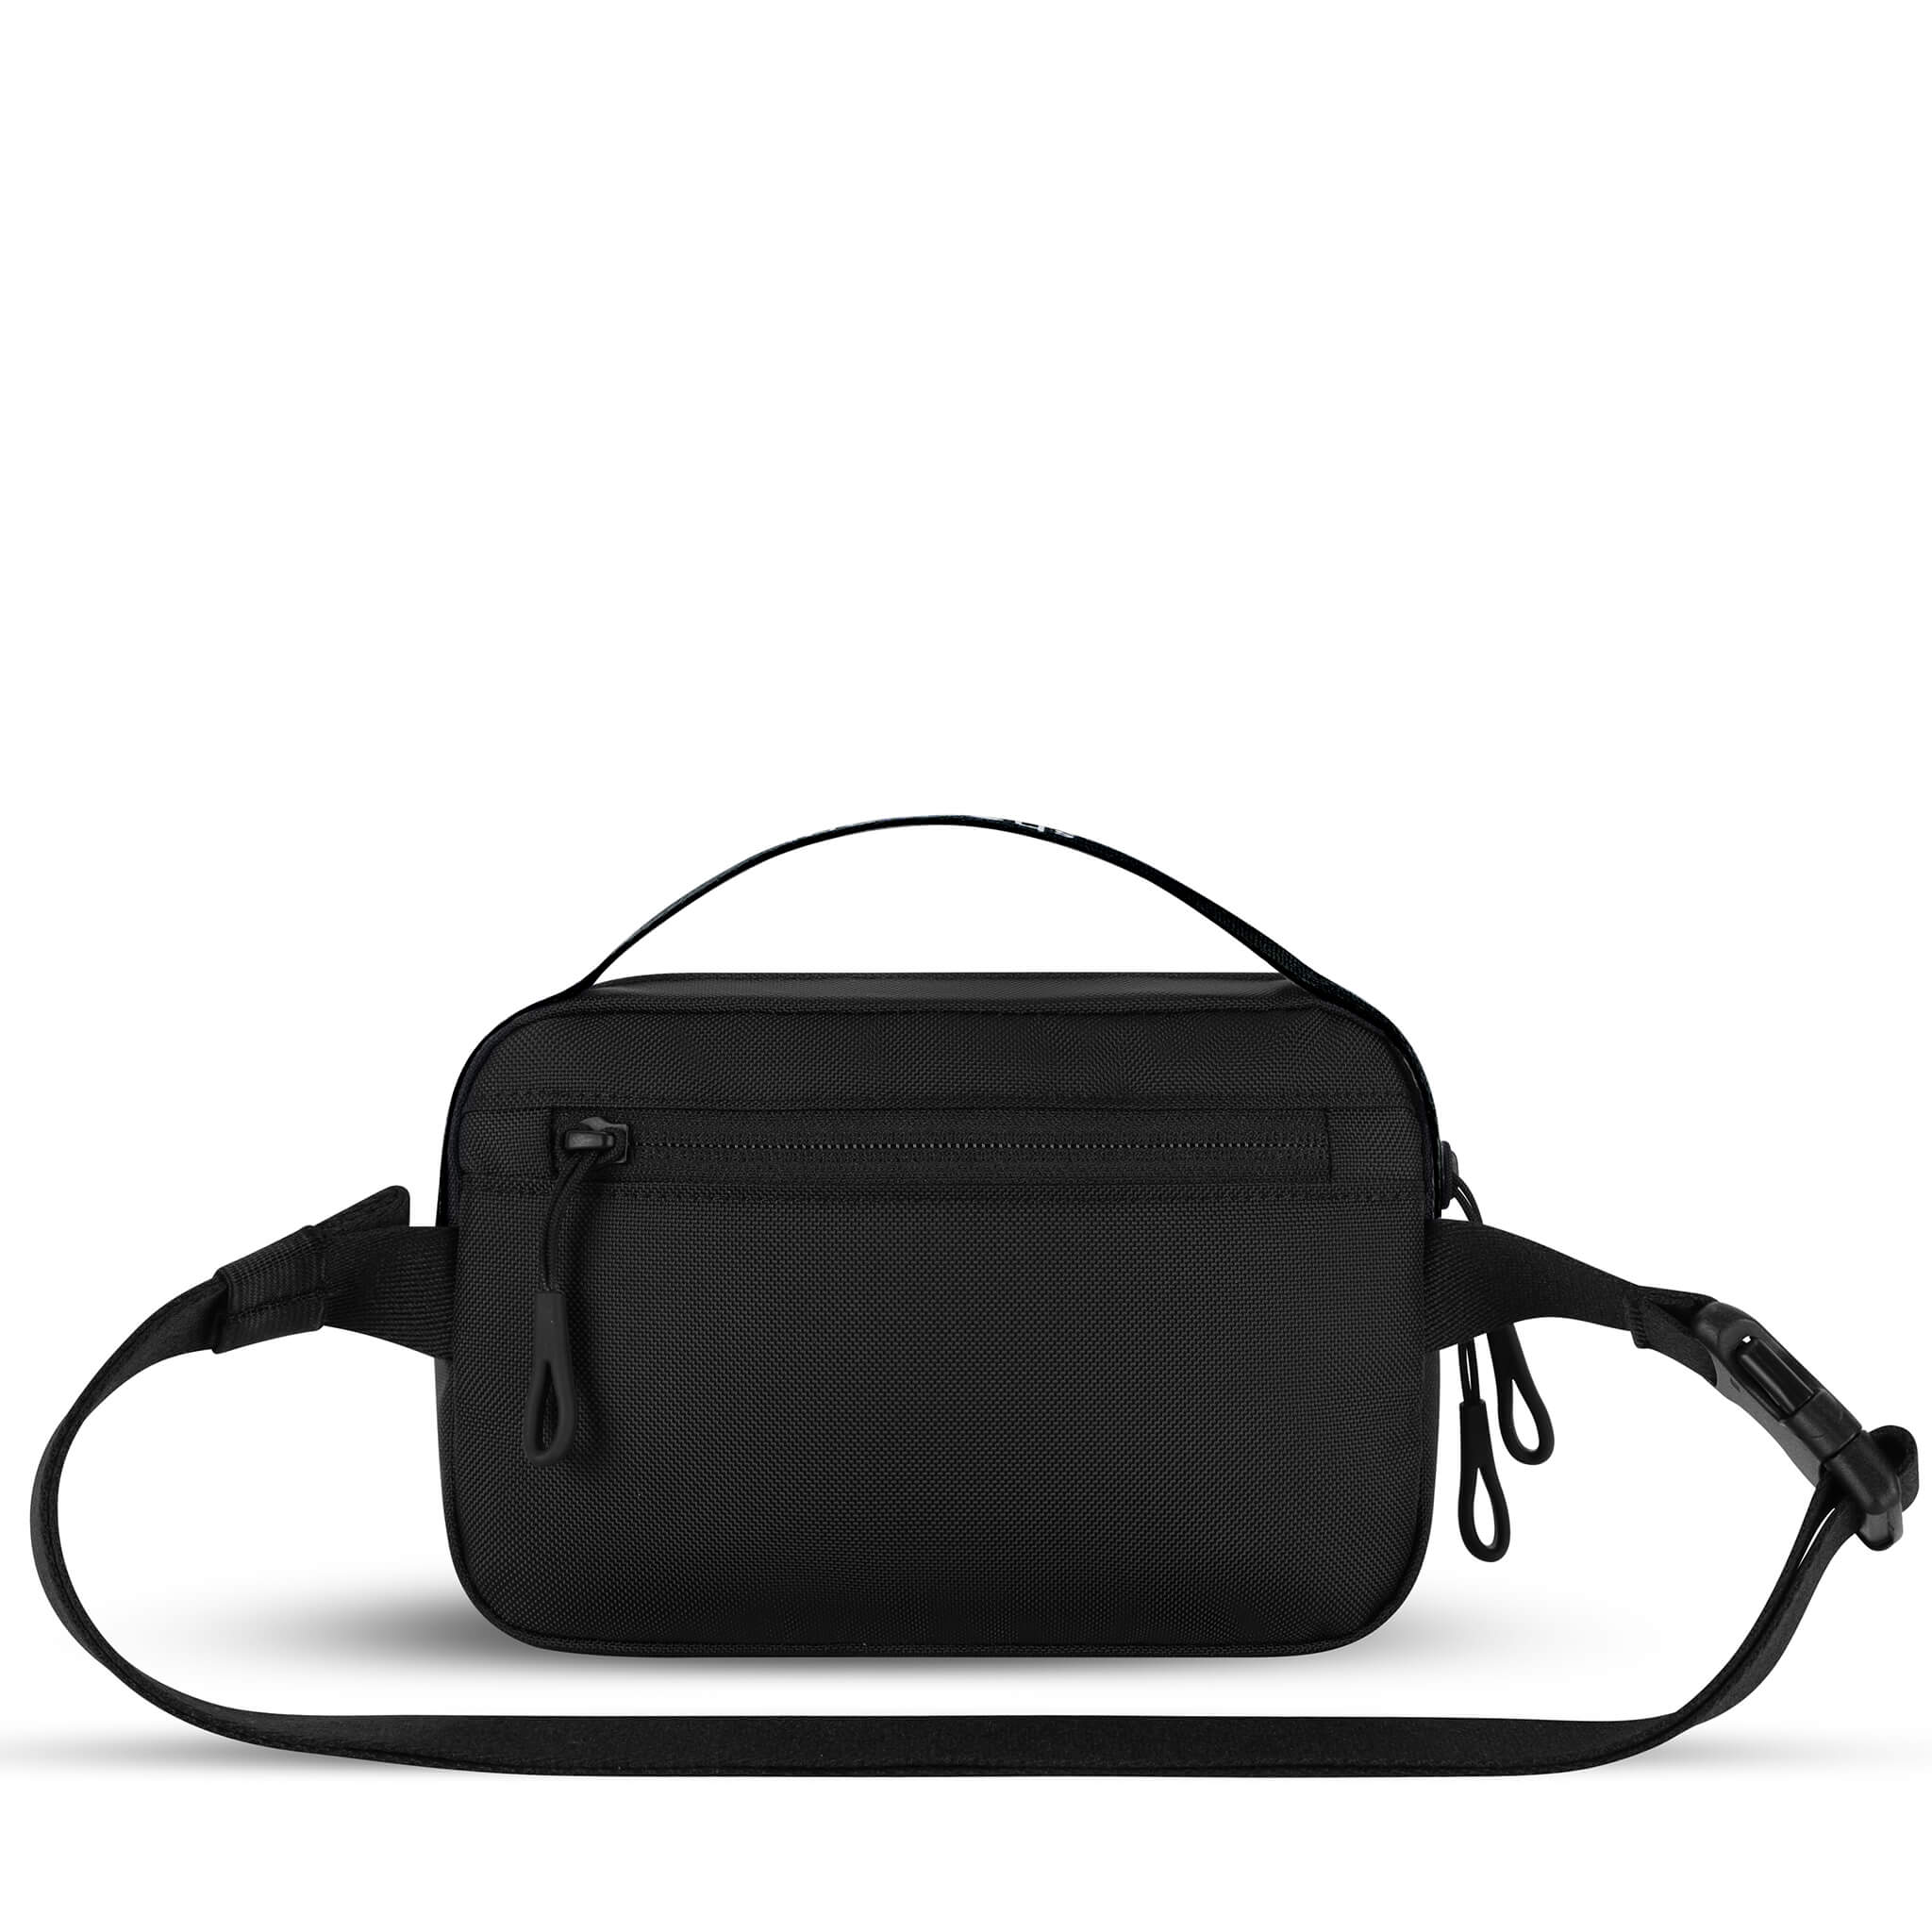 Back view of Sherpani's fanny pack, the Hyk in Raven. The back of the bag is black. Easy-pull zippers are accented in black. The fanny pack features an adjustable strap with a buckle. 